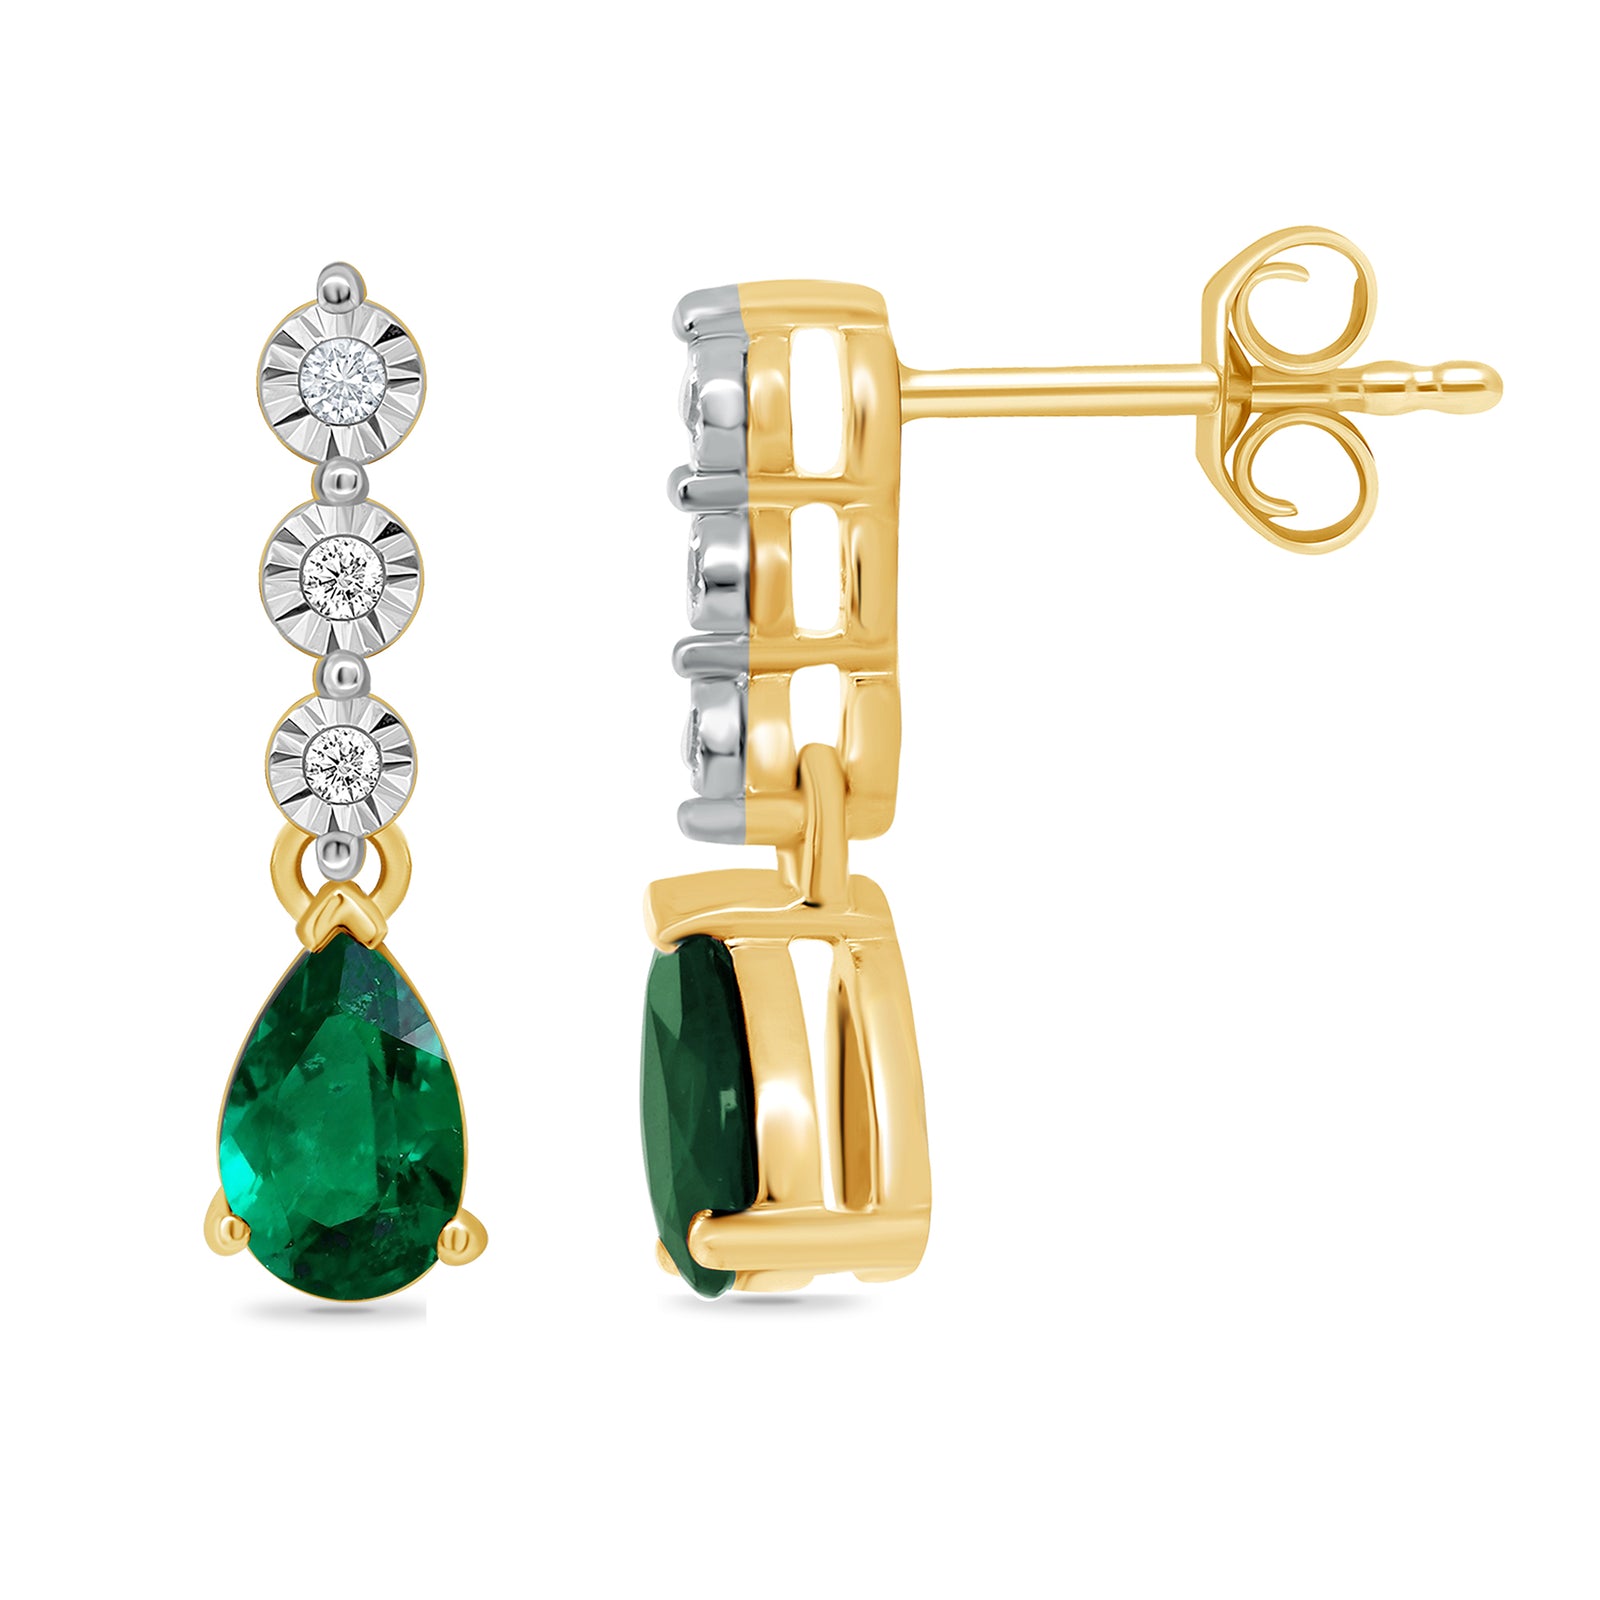 9ct gold 5x4mm pear shape emerald & miracle plate diamond drop earrings 0.02ct